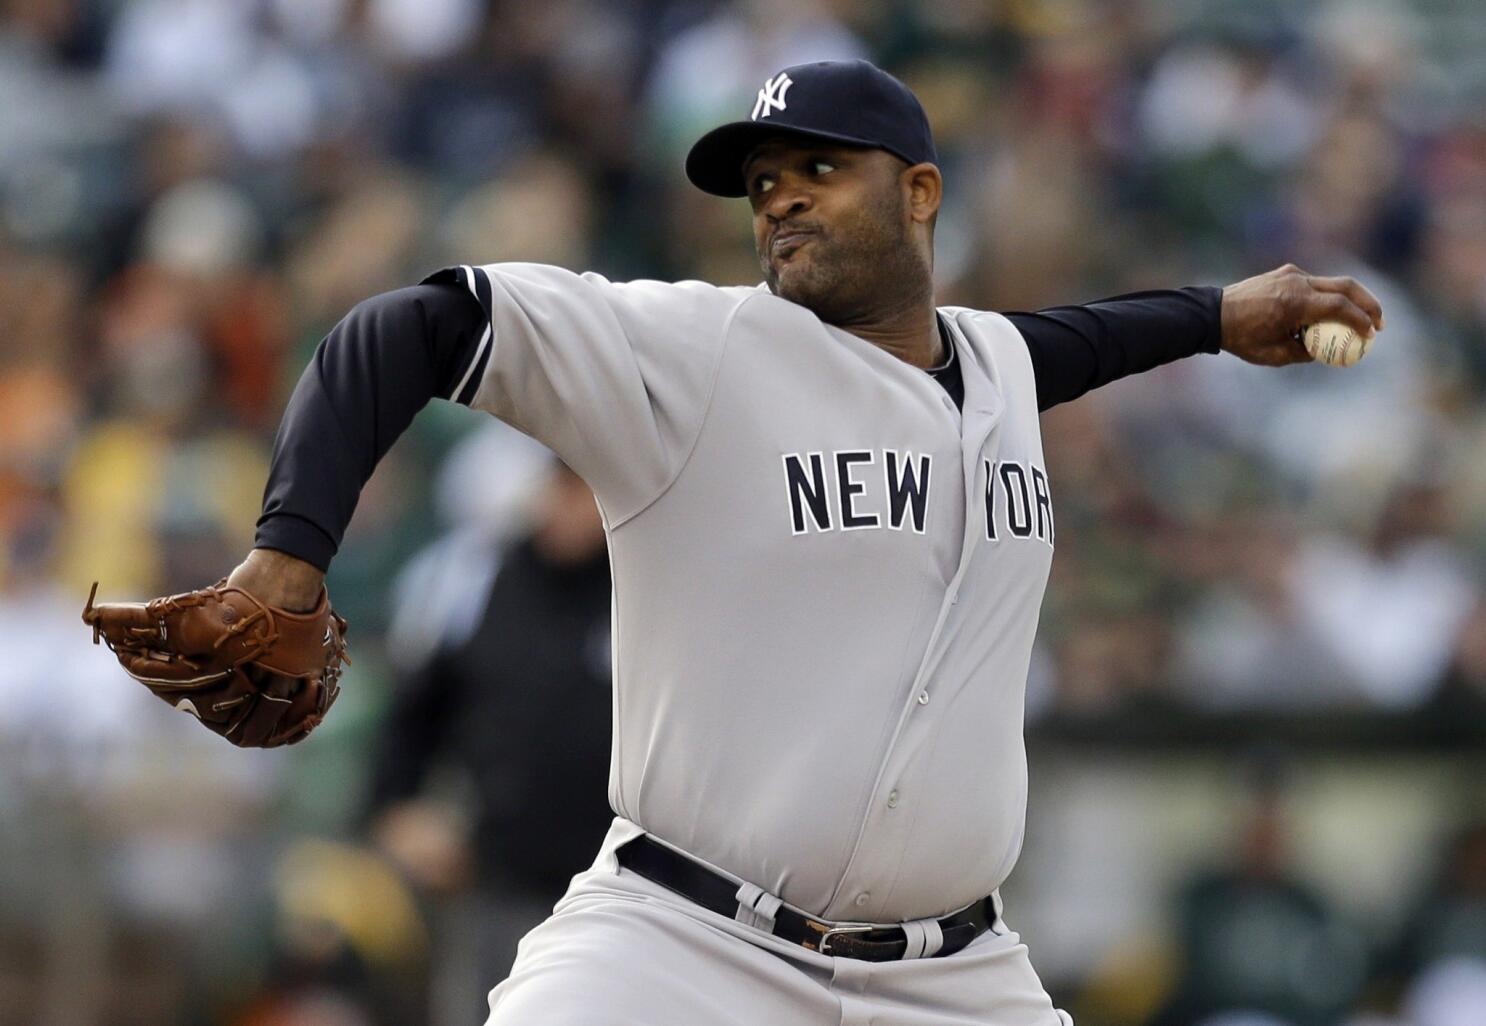 CC Sabathia lost some weight and his fastball too